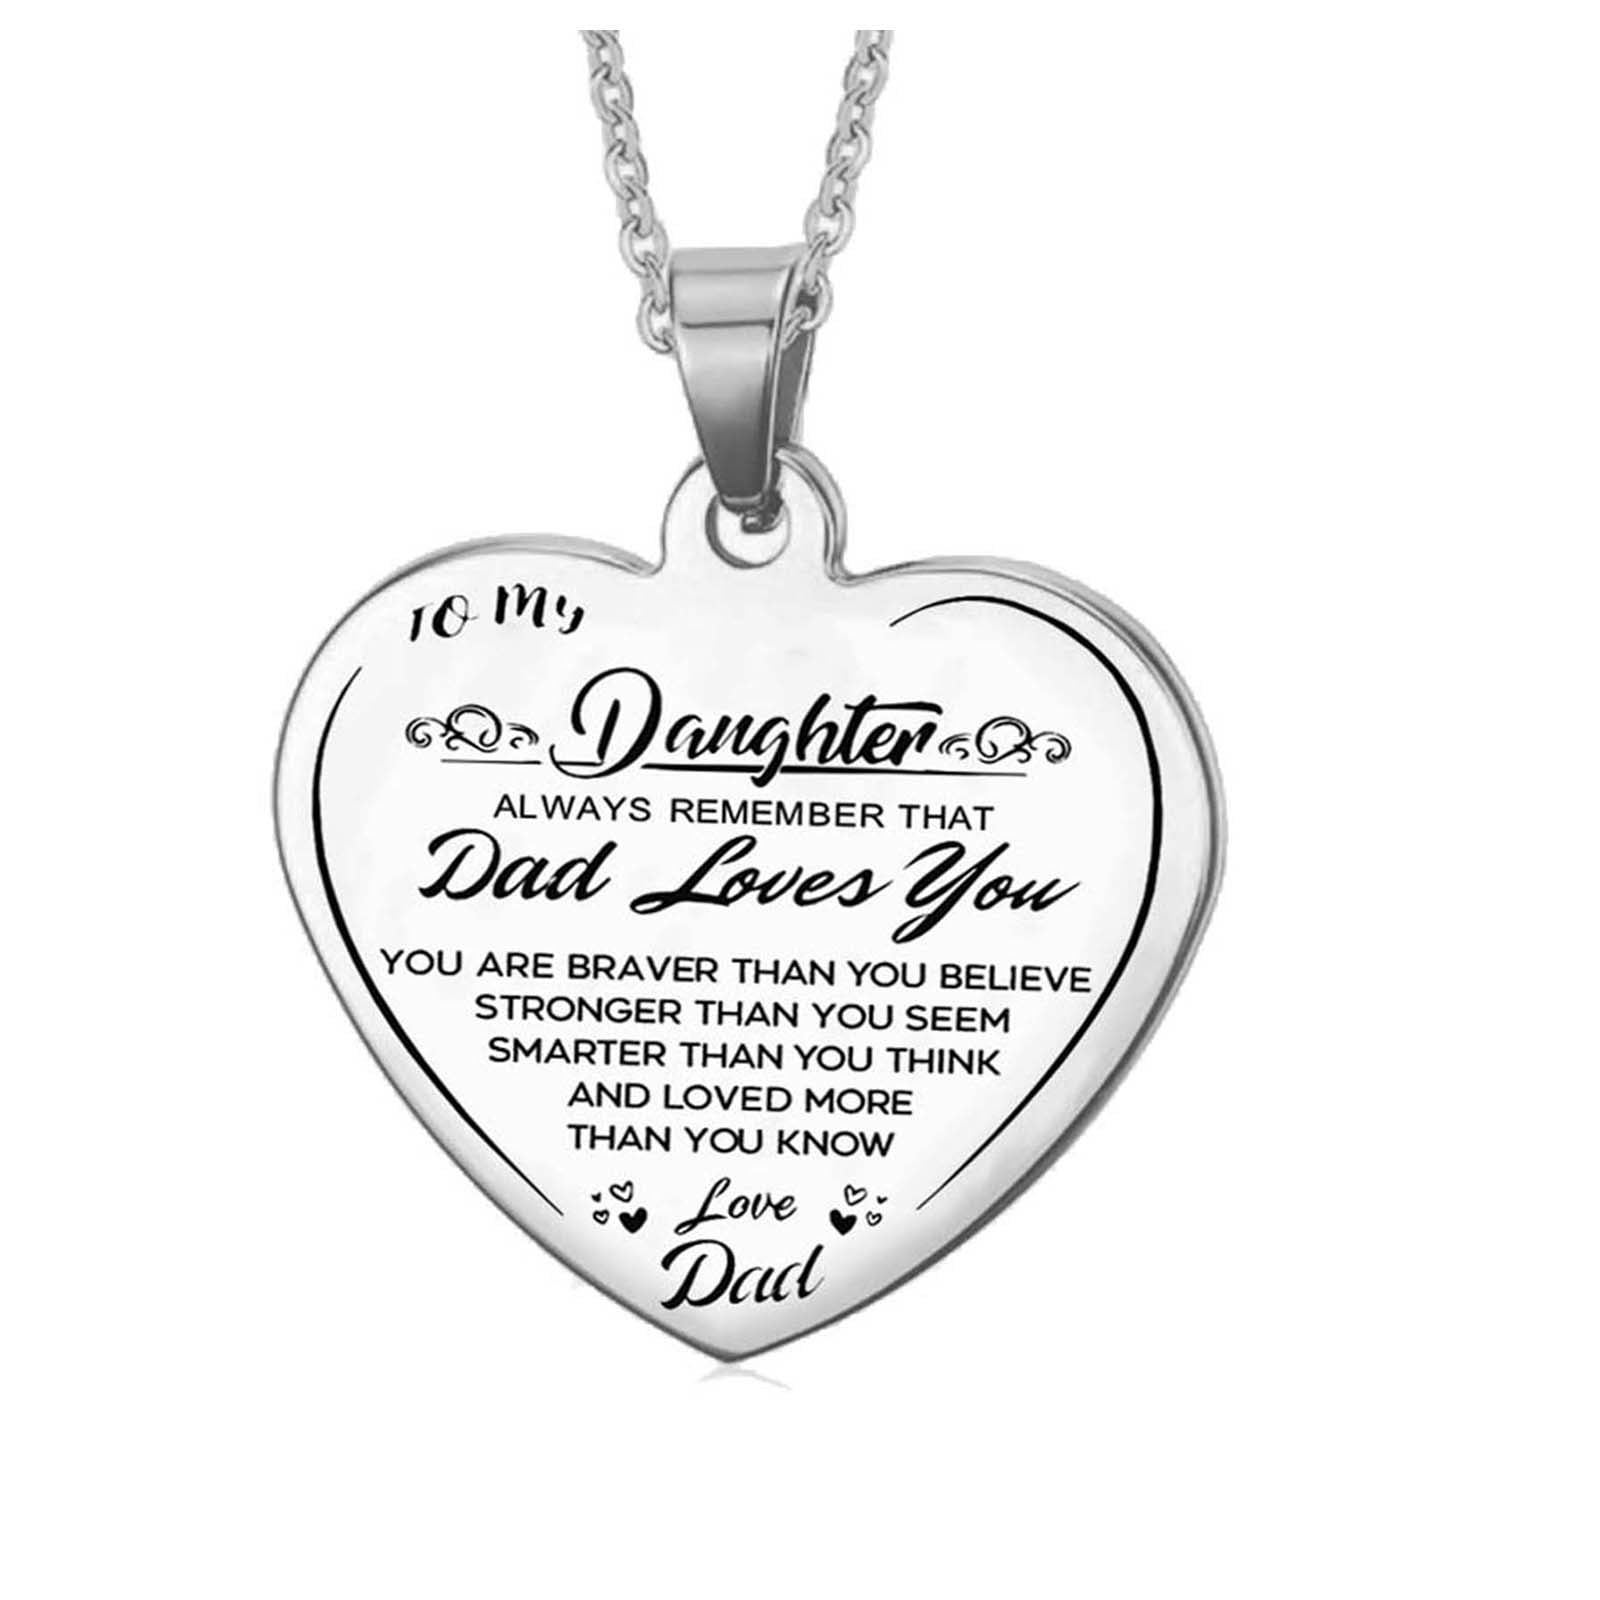 Pompotops Vintage Handmade Pendant Necklaces to My Daughter Necklace Birthday Anniversary Jewelry Gift for Girls Daughter, Women's, Silver